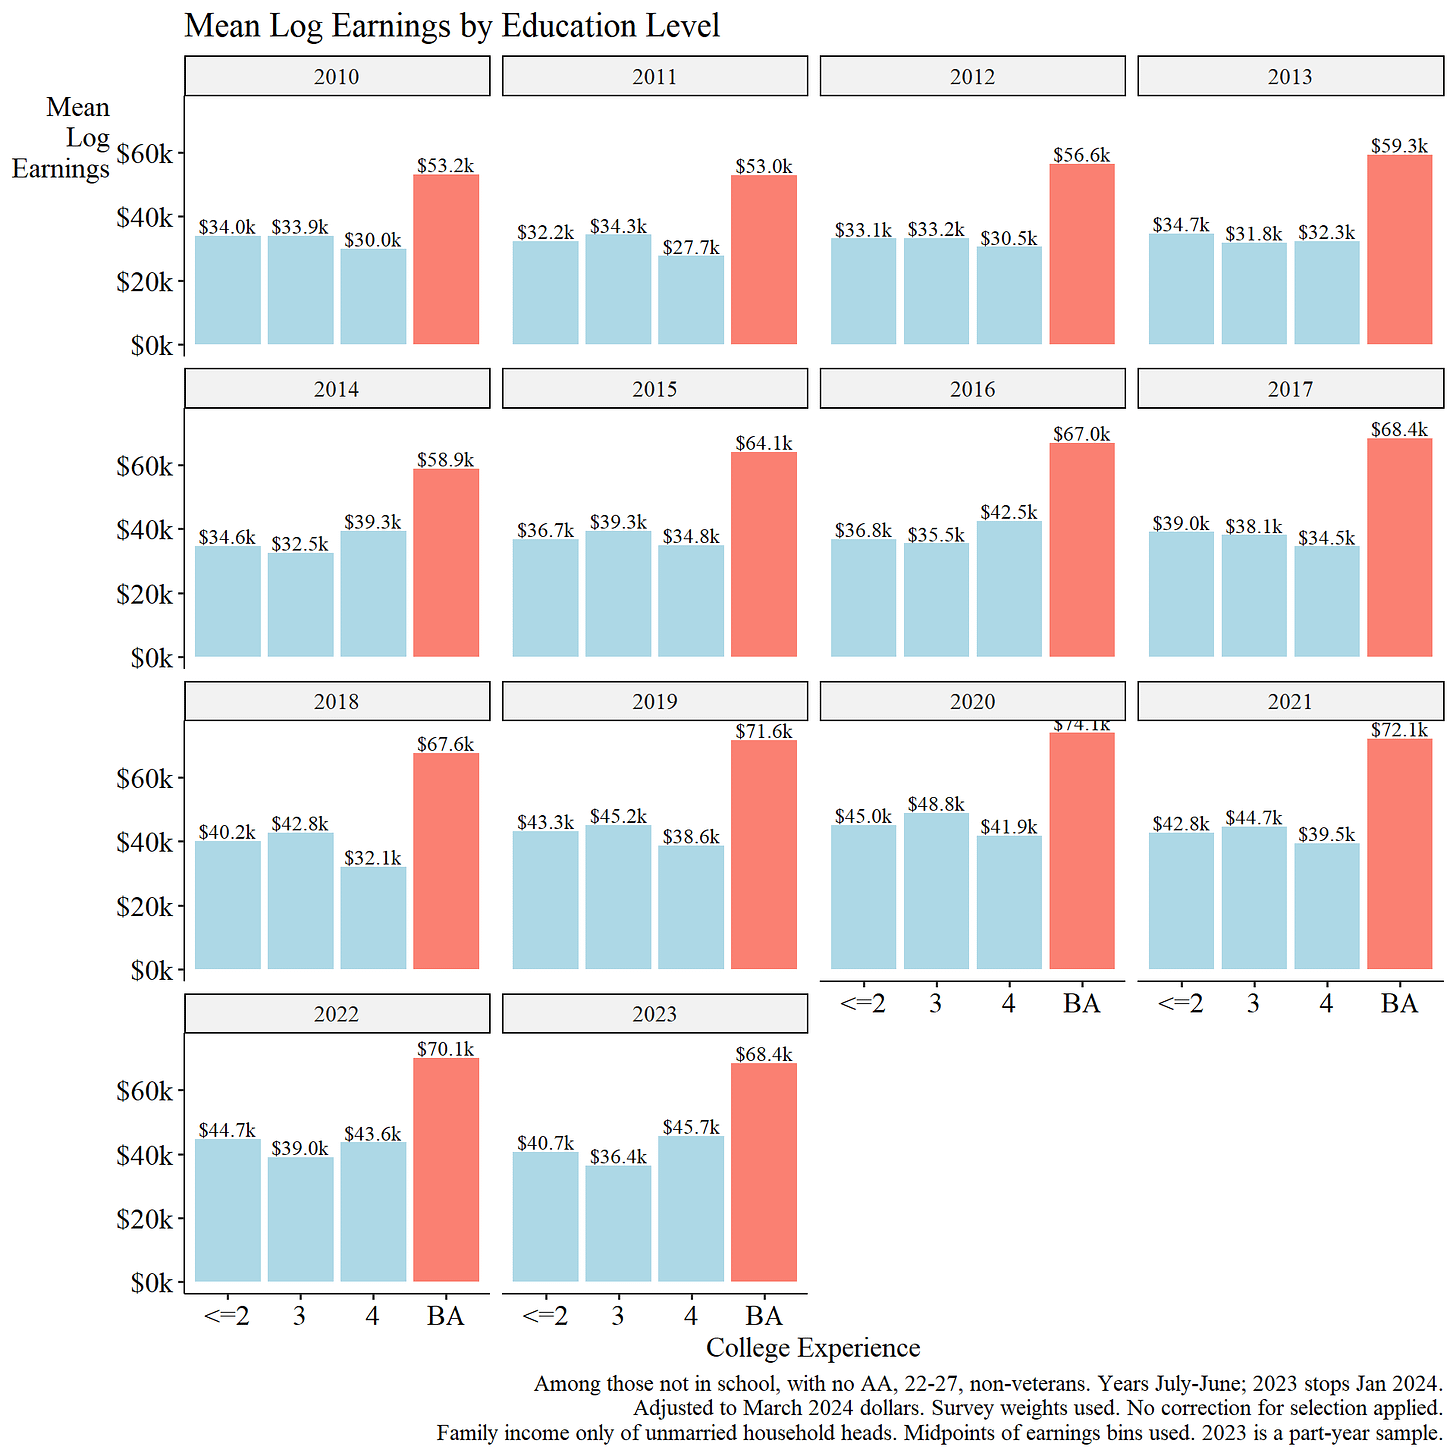 BA vs. non-grad earnings bump over time. See text for description of findings.